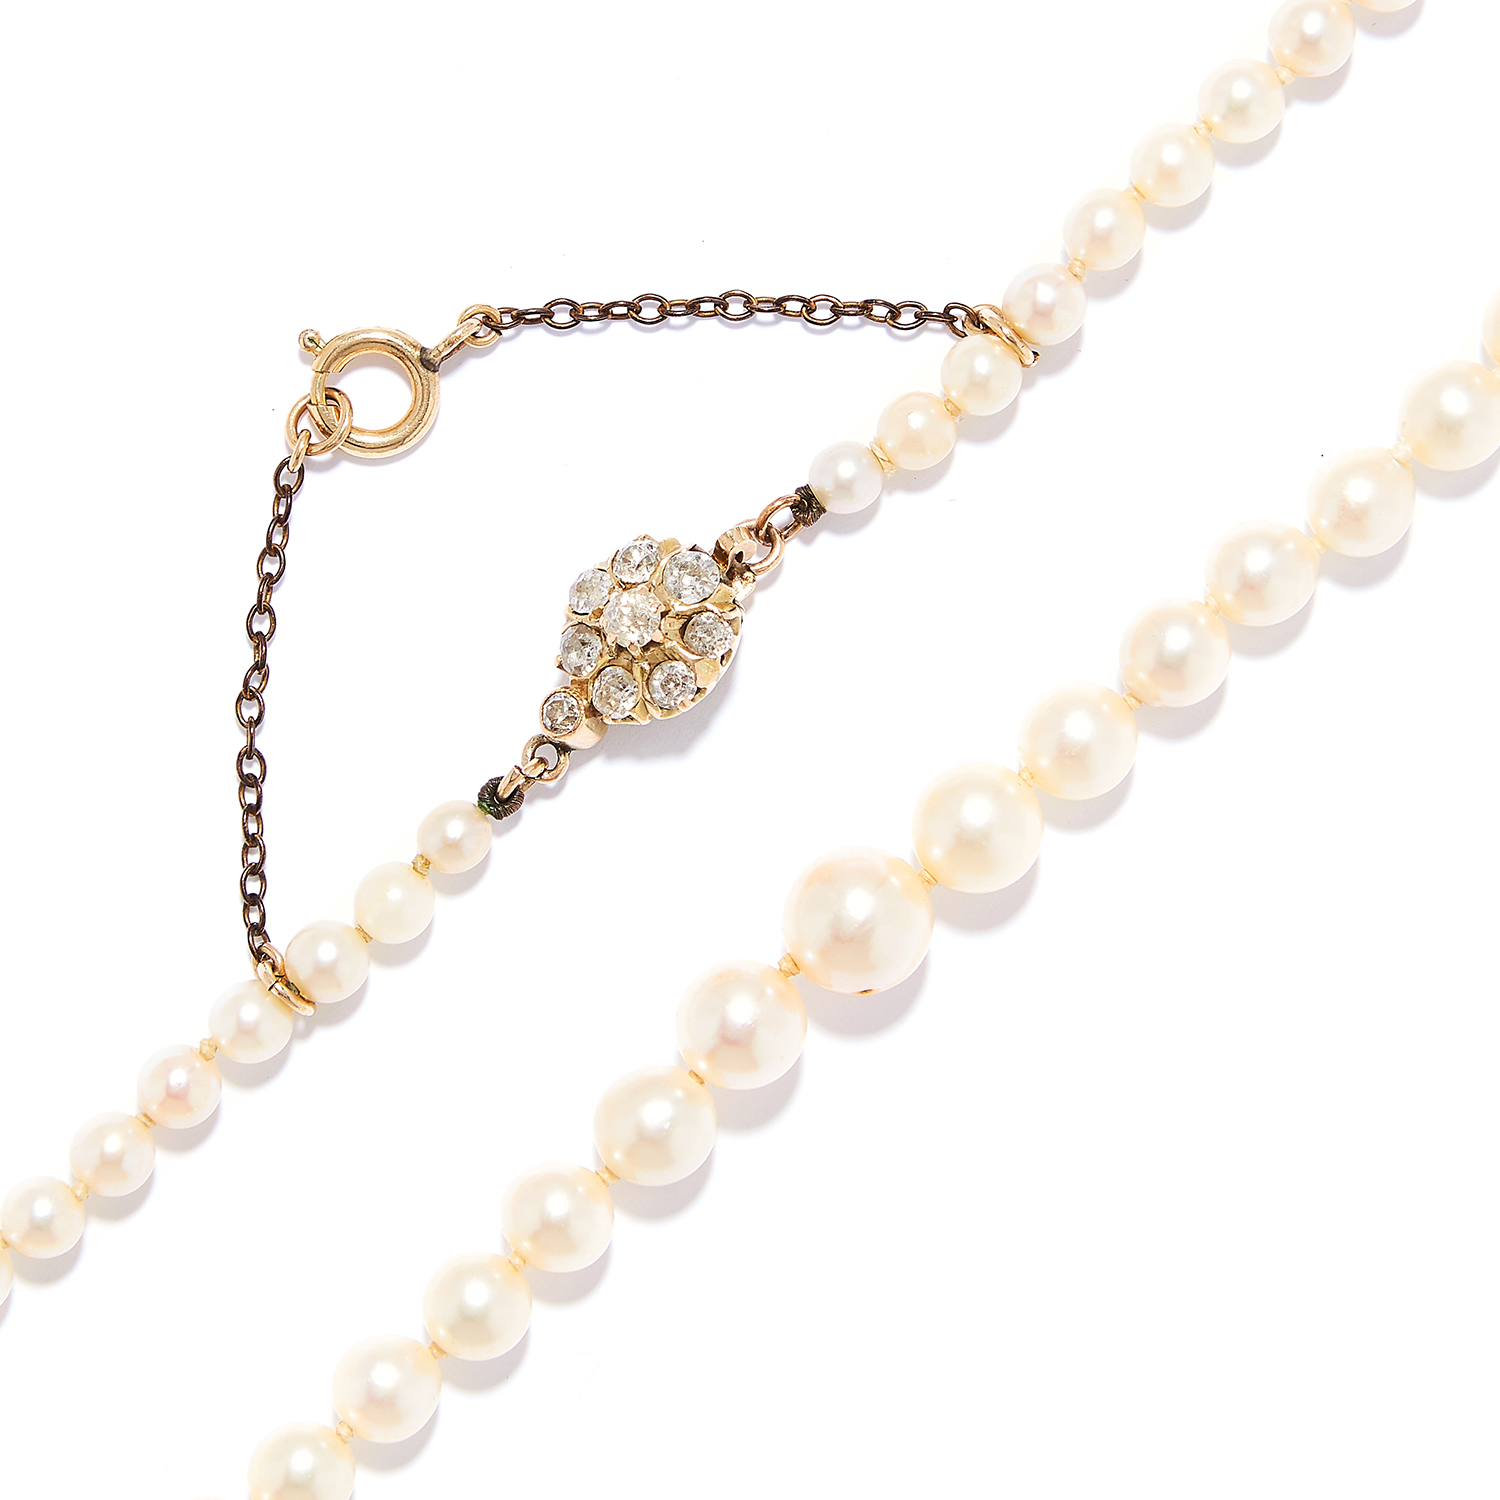 ANTIQUE PEARL AND DIAMOND NECKLACE in yellow gold, comprising of a single strand of pearls with - Image 2 of 2